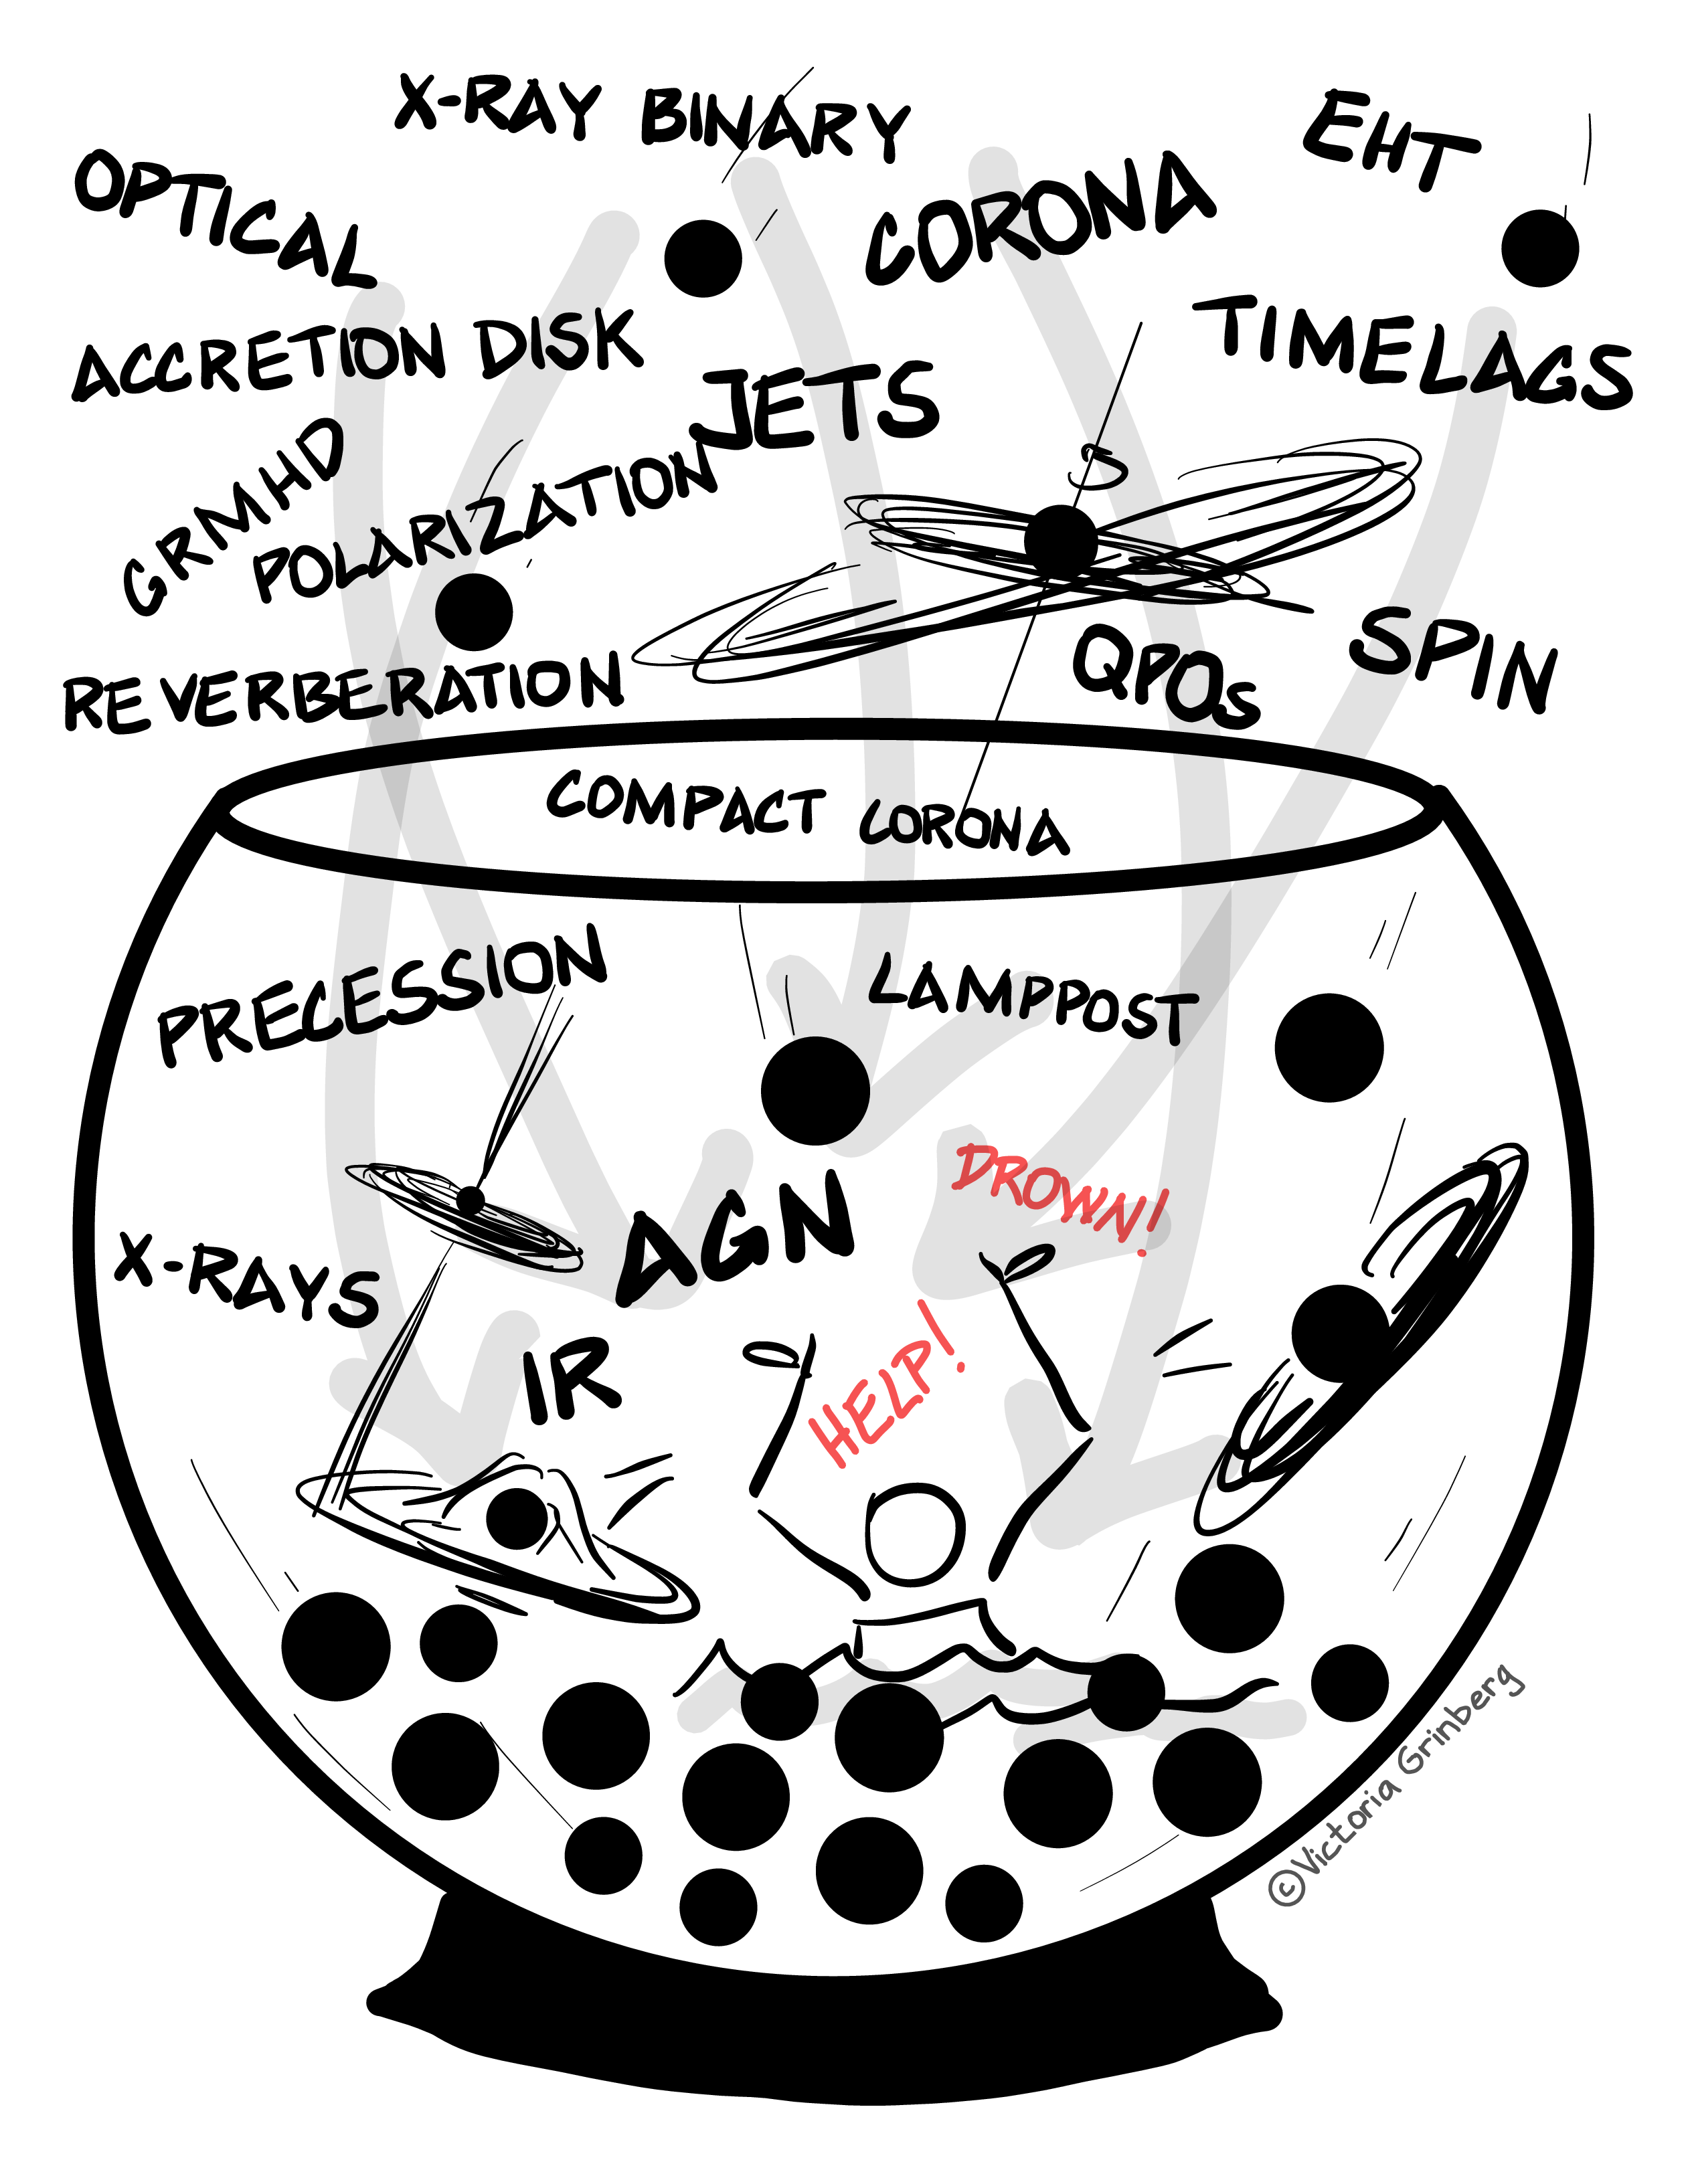 Mostly flack and white digital drawing of a fish bowl half-filled with black circles representing black holes, with more black holes, some of them with accretion disk and jets falling in. Words also falling into the bowl: X-ray binary, corona, EHT, time lags, spin, QPOs, jets, optical, accretion disk, GRMHD, polarizaion, precession, lamppost, AGN, X-rays, precession, IR. A stick person is drowning in the bowl and shouting for help.